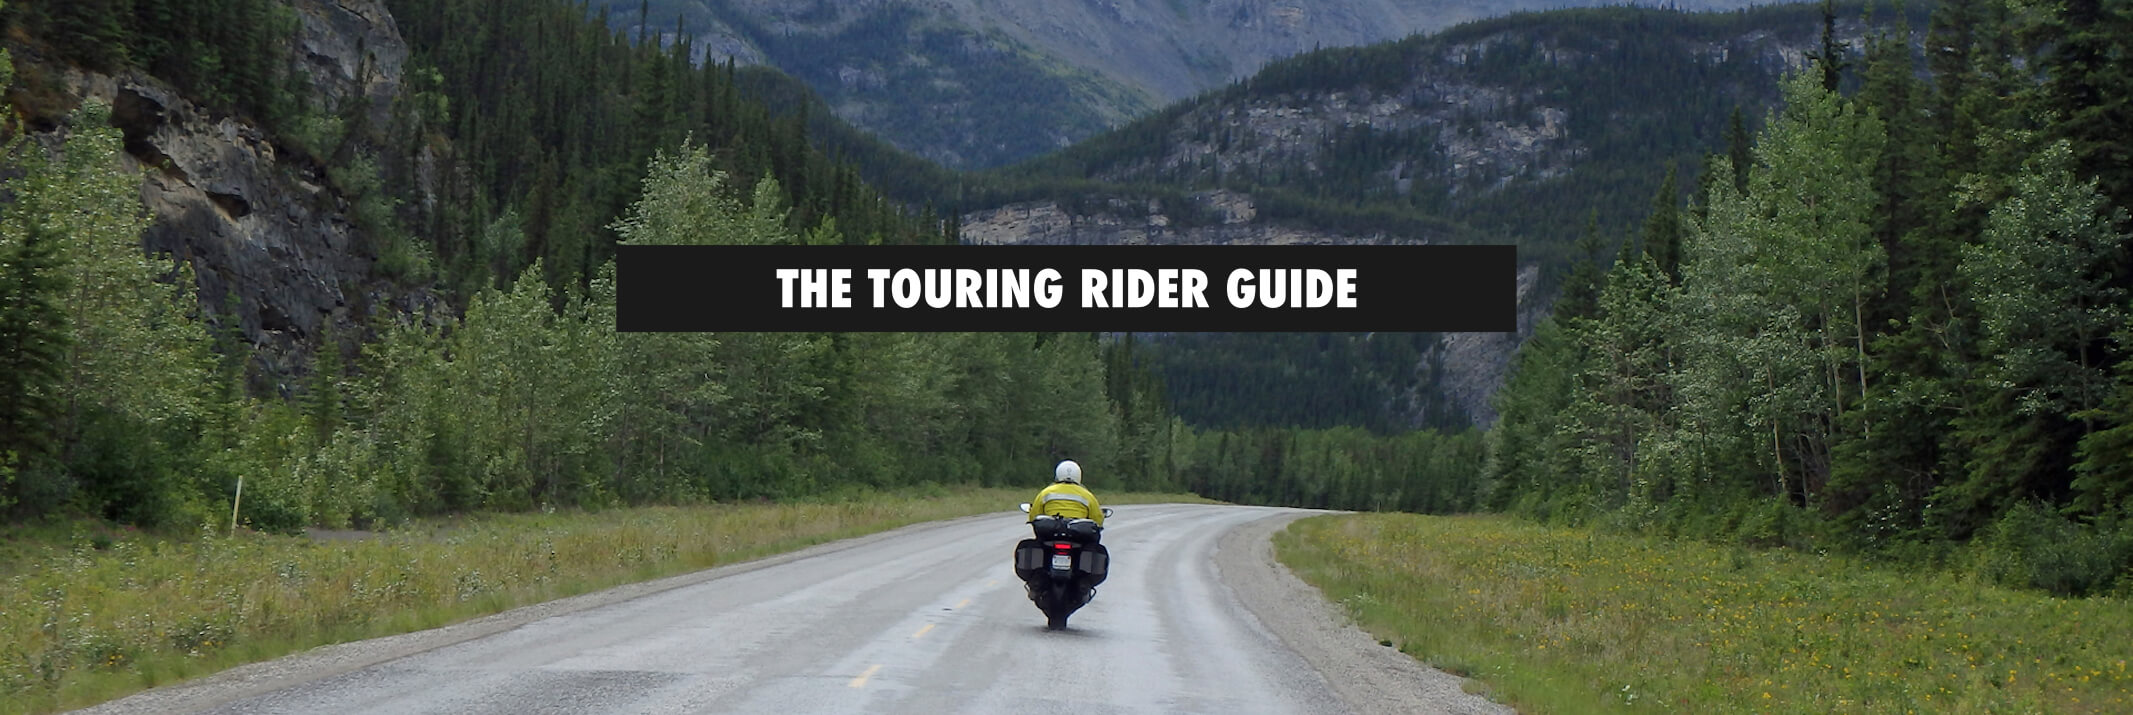 The Touring Rider